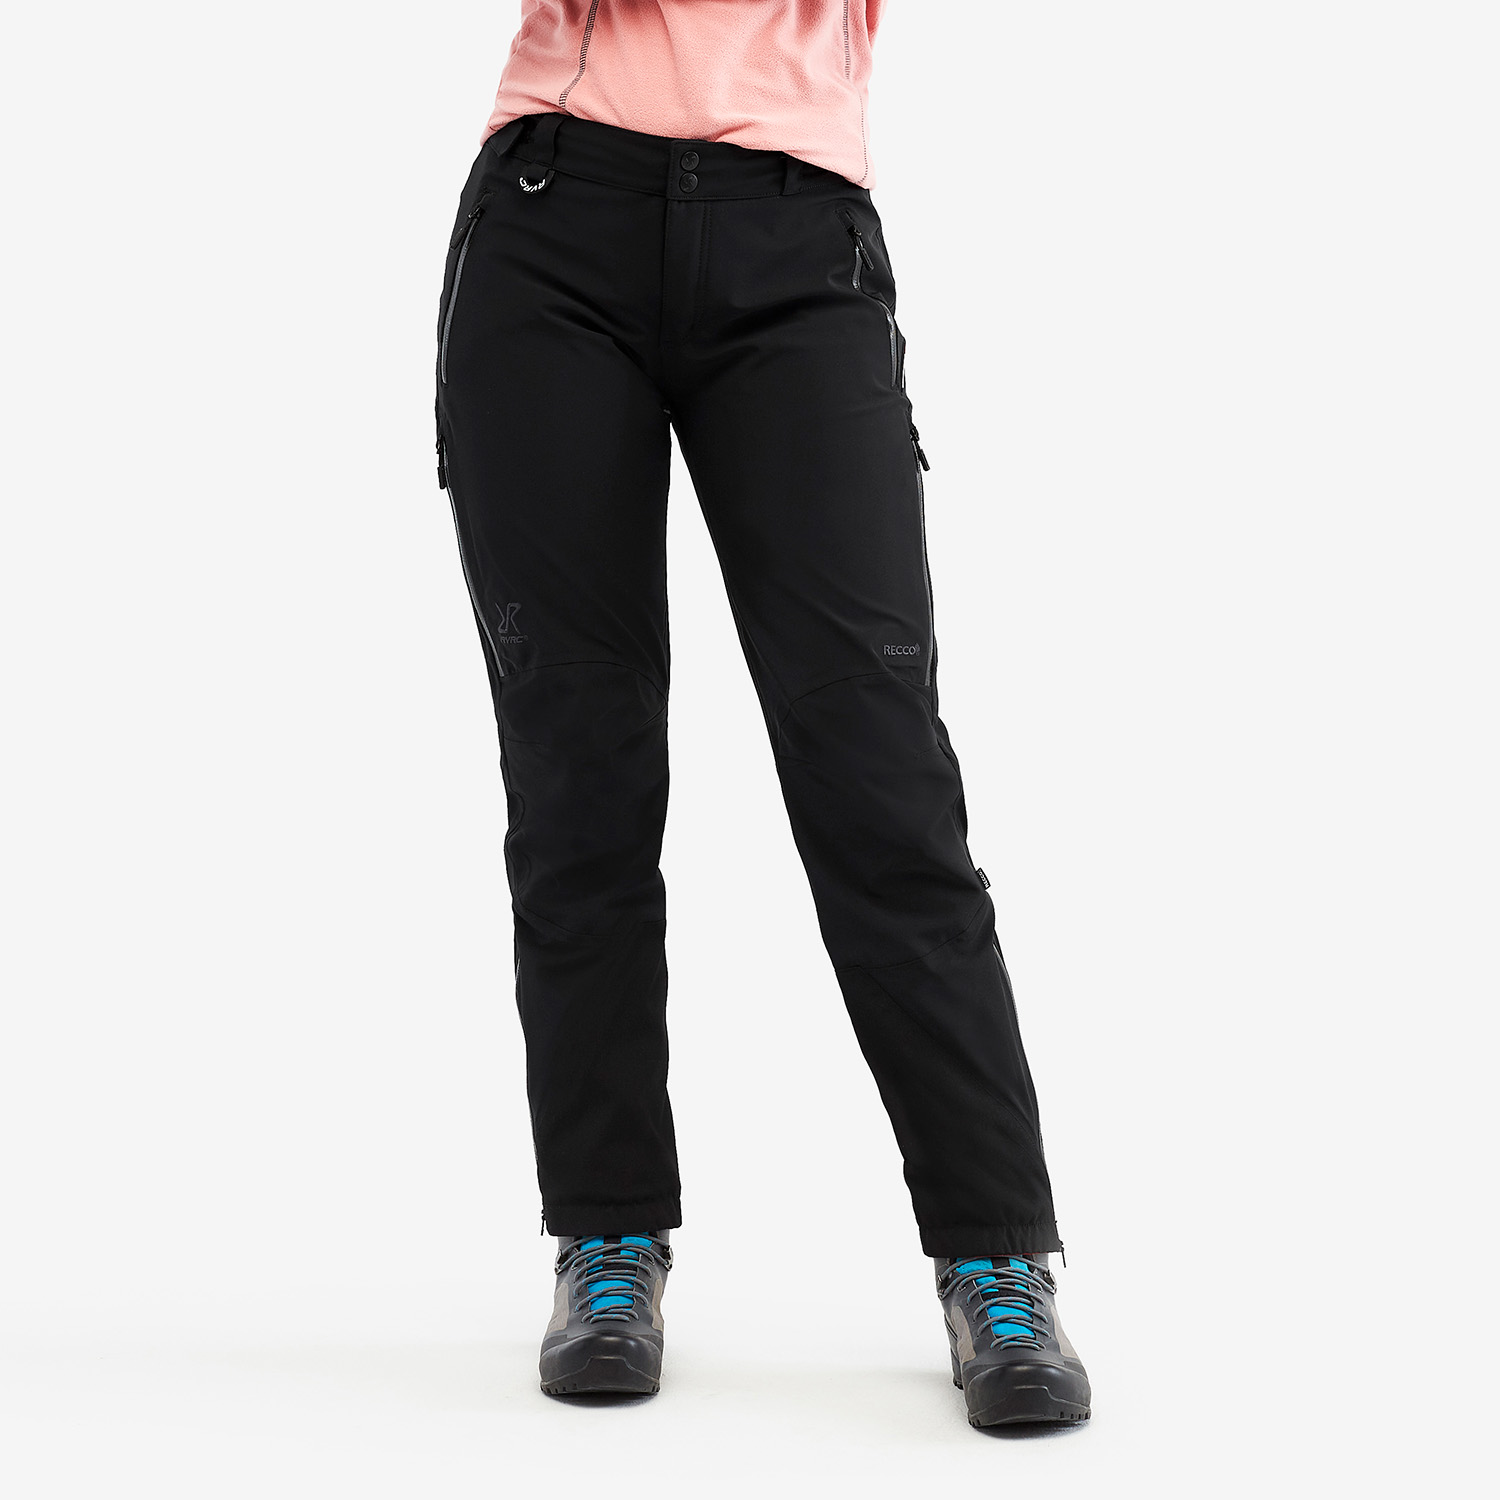 Cyclone Rescue Pants Black Mujeres